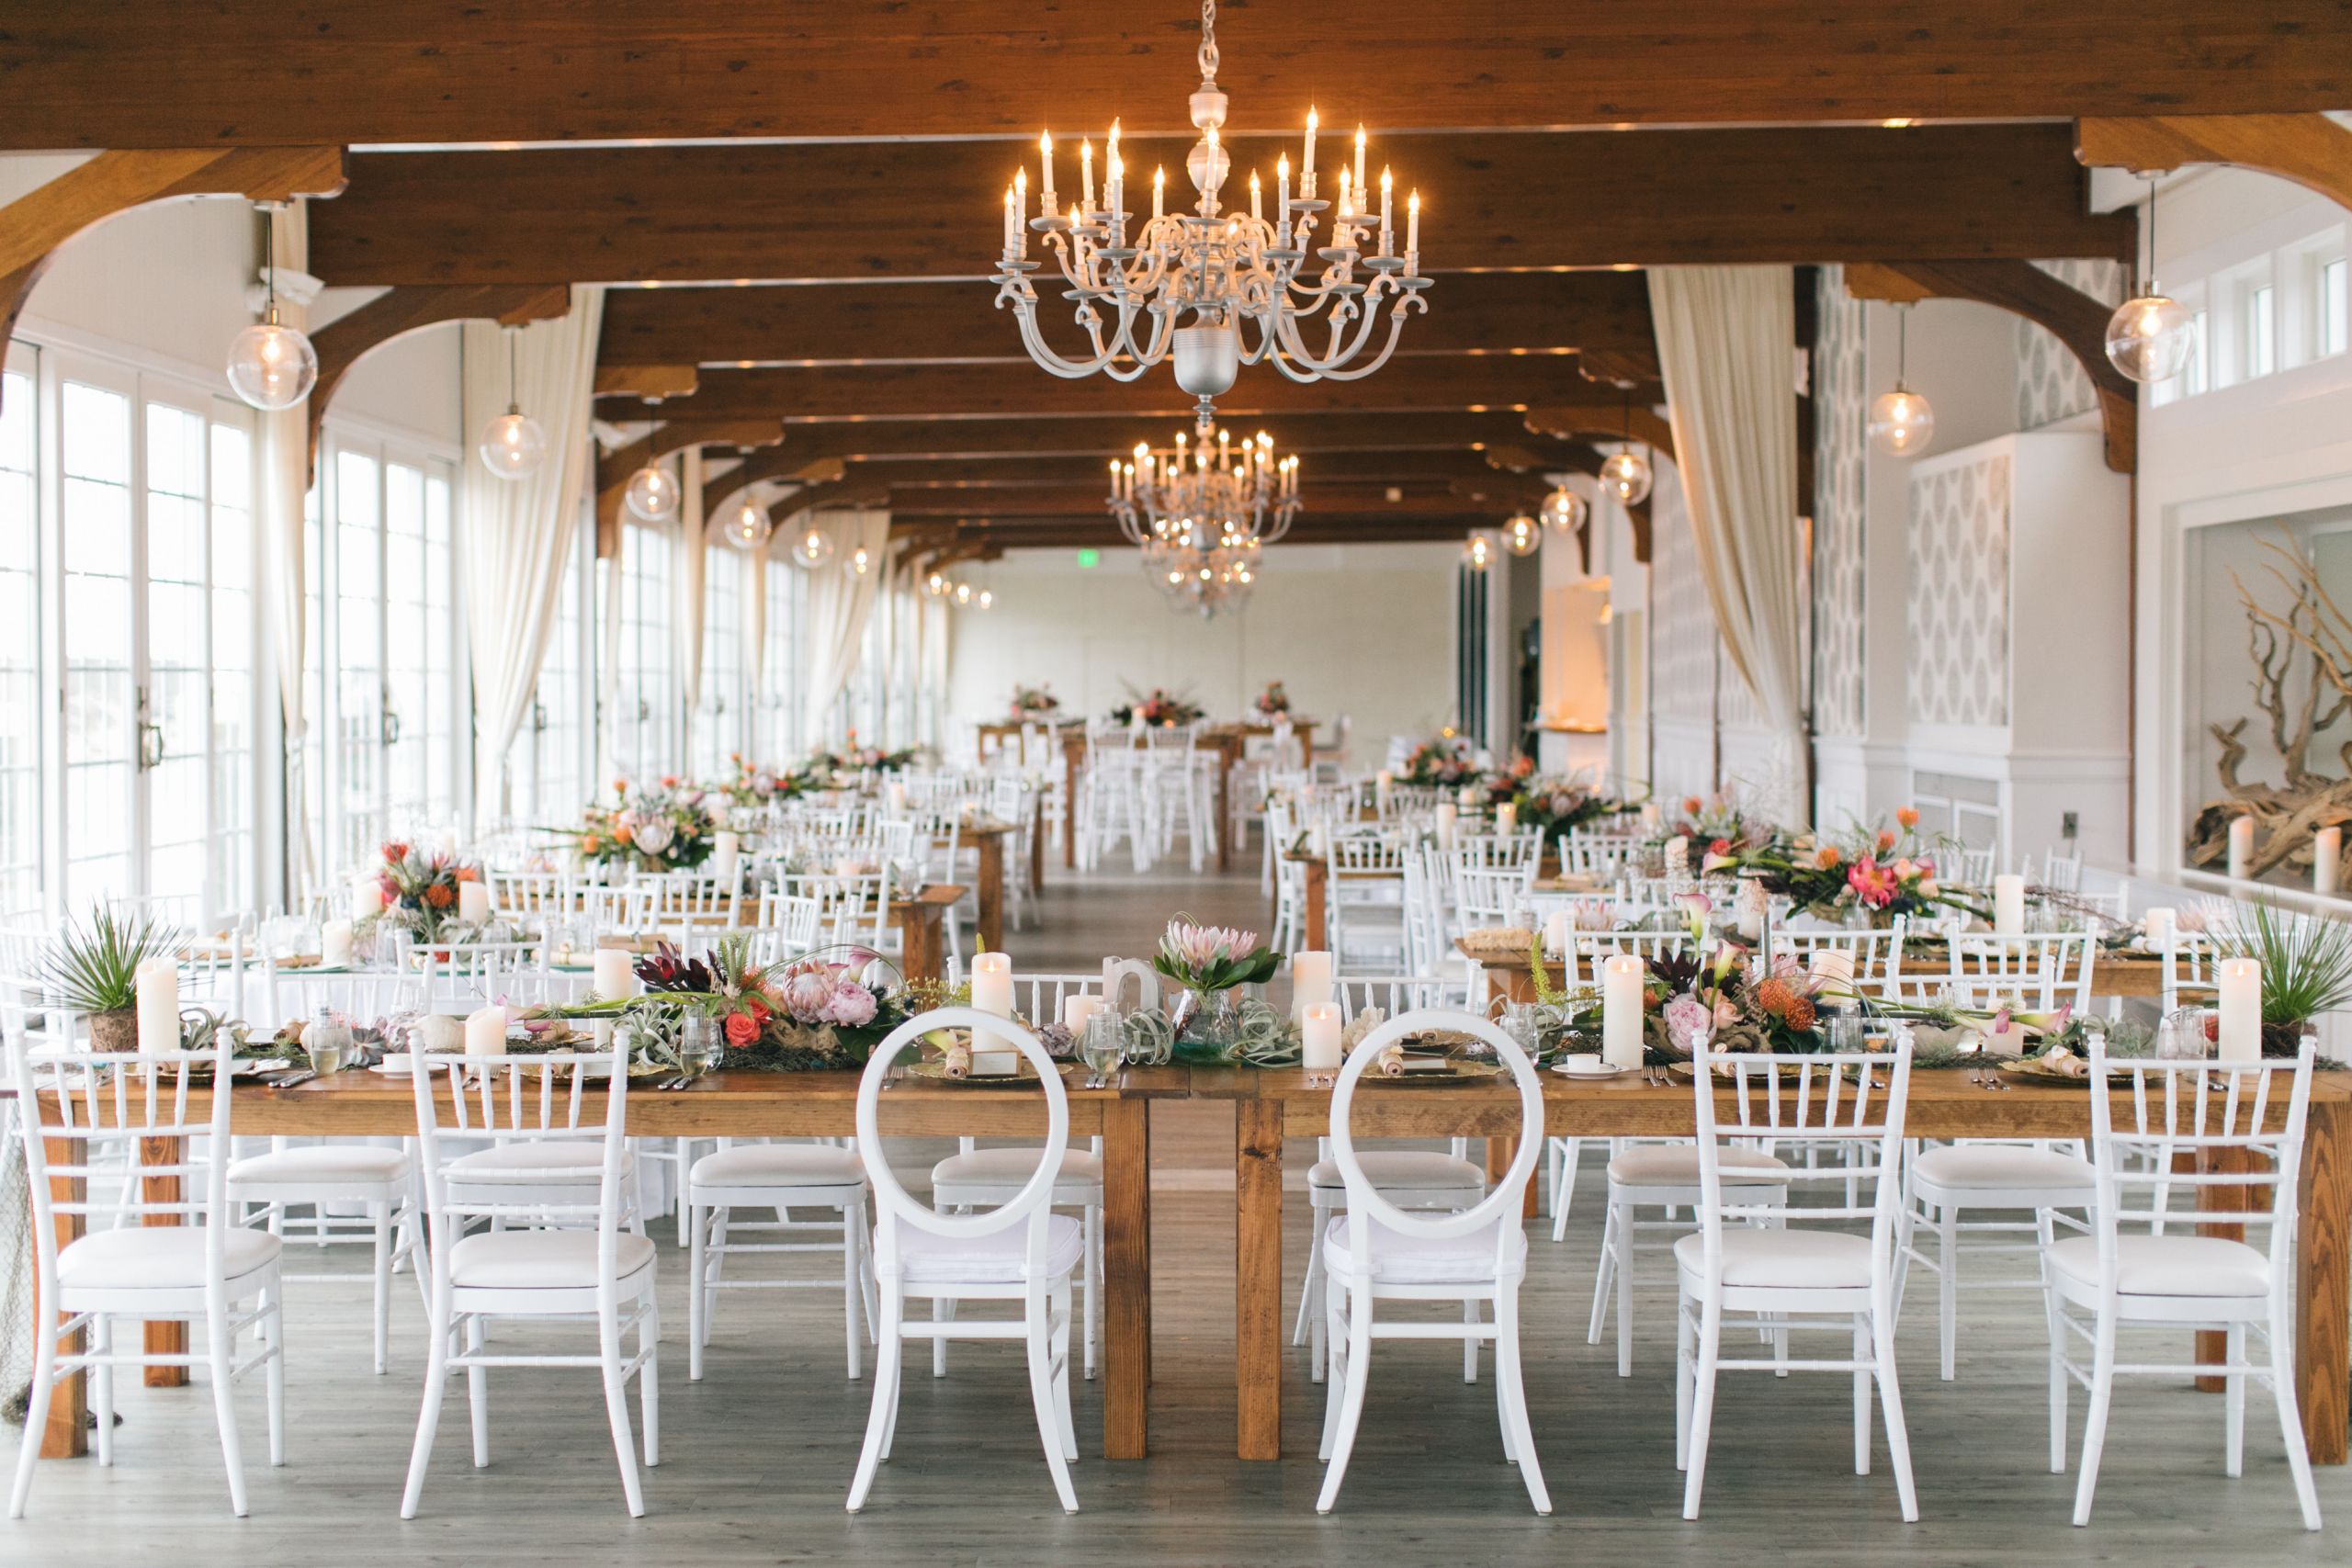 Cape Cod Wedding Venues
 Top Five Things to Consider when Selecting Your Wedding Venue